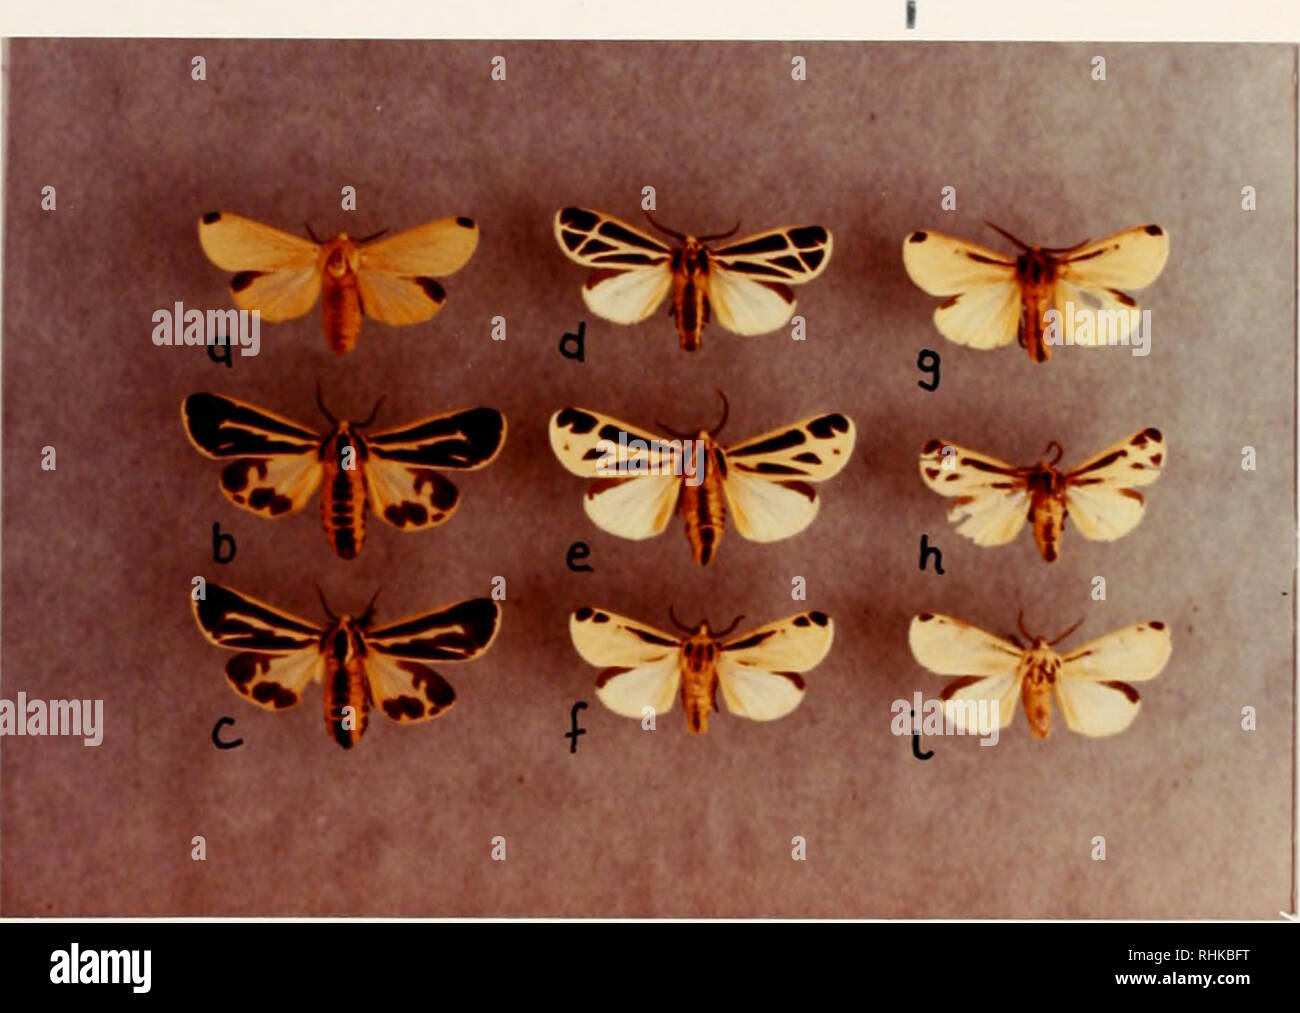 . Biology and hybridization of Apantesis phalerata (Harris) and A. radians Walker in Florida (Lepidoptera: Arctiidae). Moths; Lepidoptera; Arctiidae; Apantesis. â ^. Figure k. Various forms of Apantesis phalerata found in the light strain. (a) light, homozygous female; (b,c) dark females with full maculation; (d) dark male with full maculation; (e) heterozygous male showing partial expression of maculation; (f,g) light, homozygous males; (h) wild male collected in Gainesville, Florida, heterozygous for maculation; (i) light, homozygous male reported by Kimball. Please note that these images ar Stock Photo